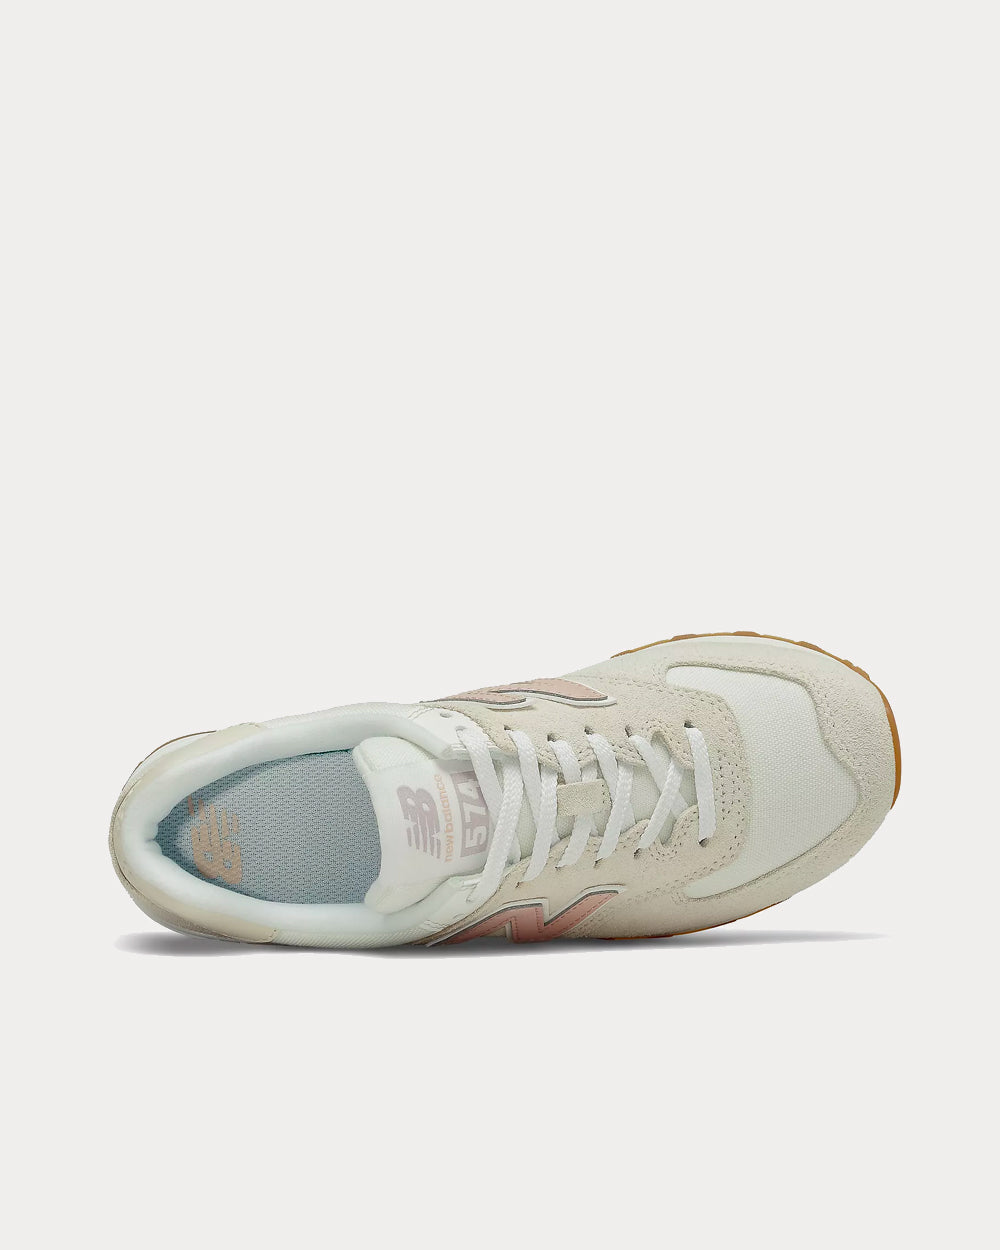 New Balance - 574 Sea Salt With Rose Water Low Top Sneakers